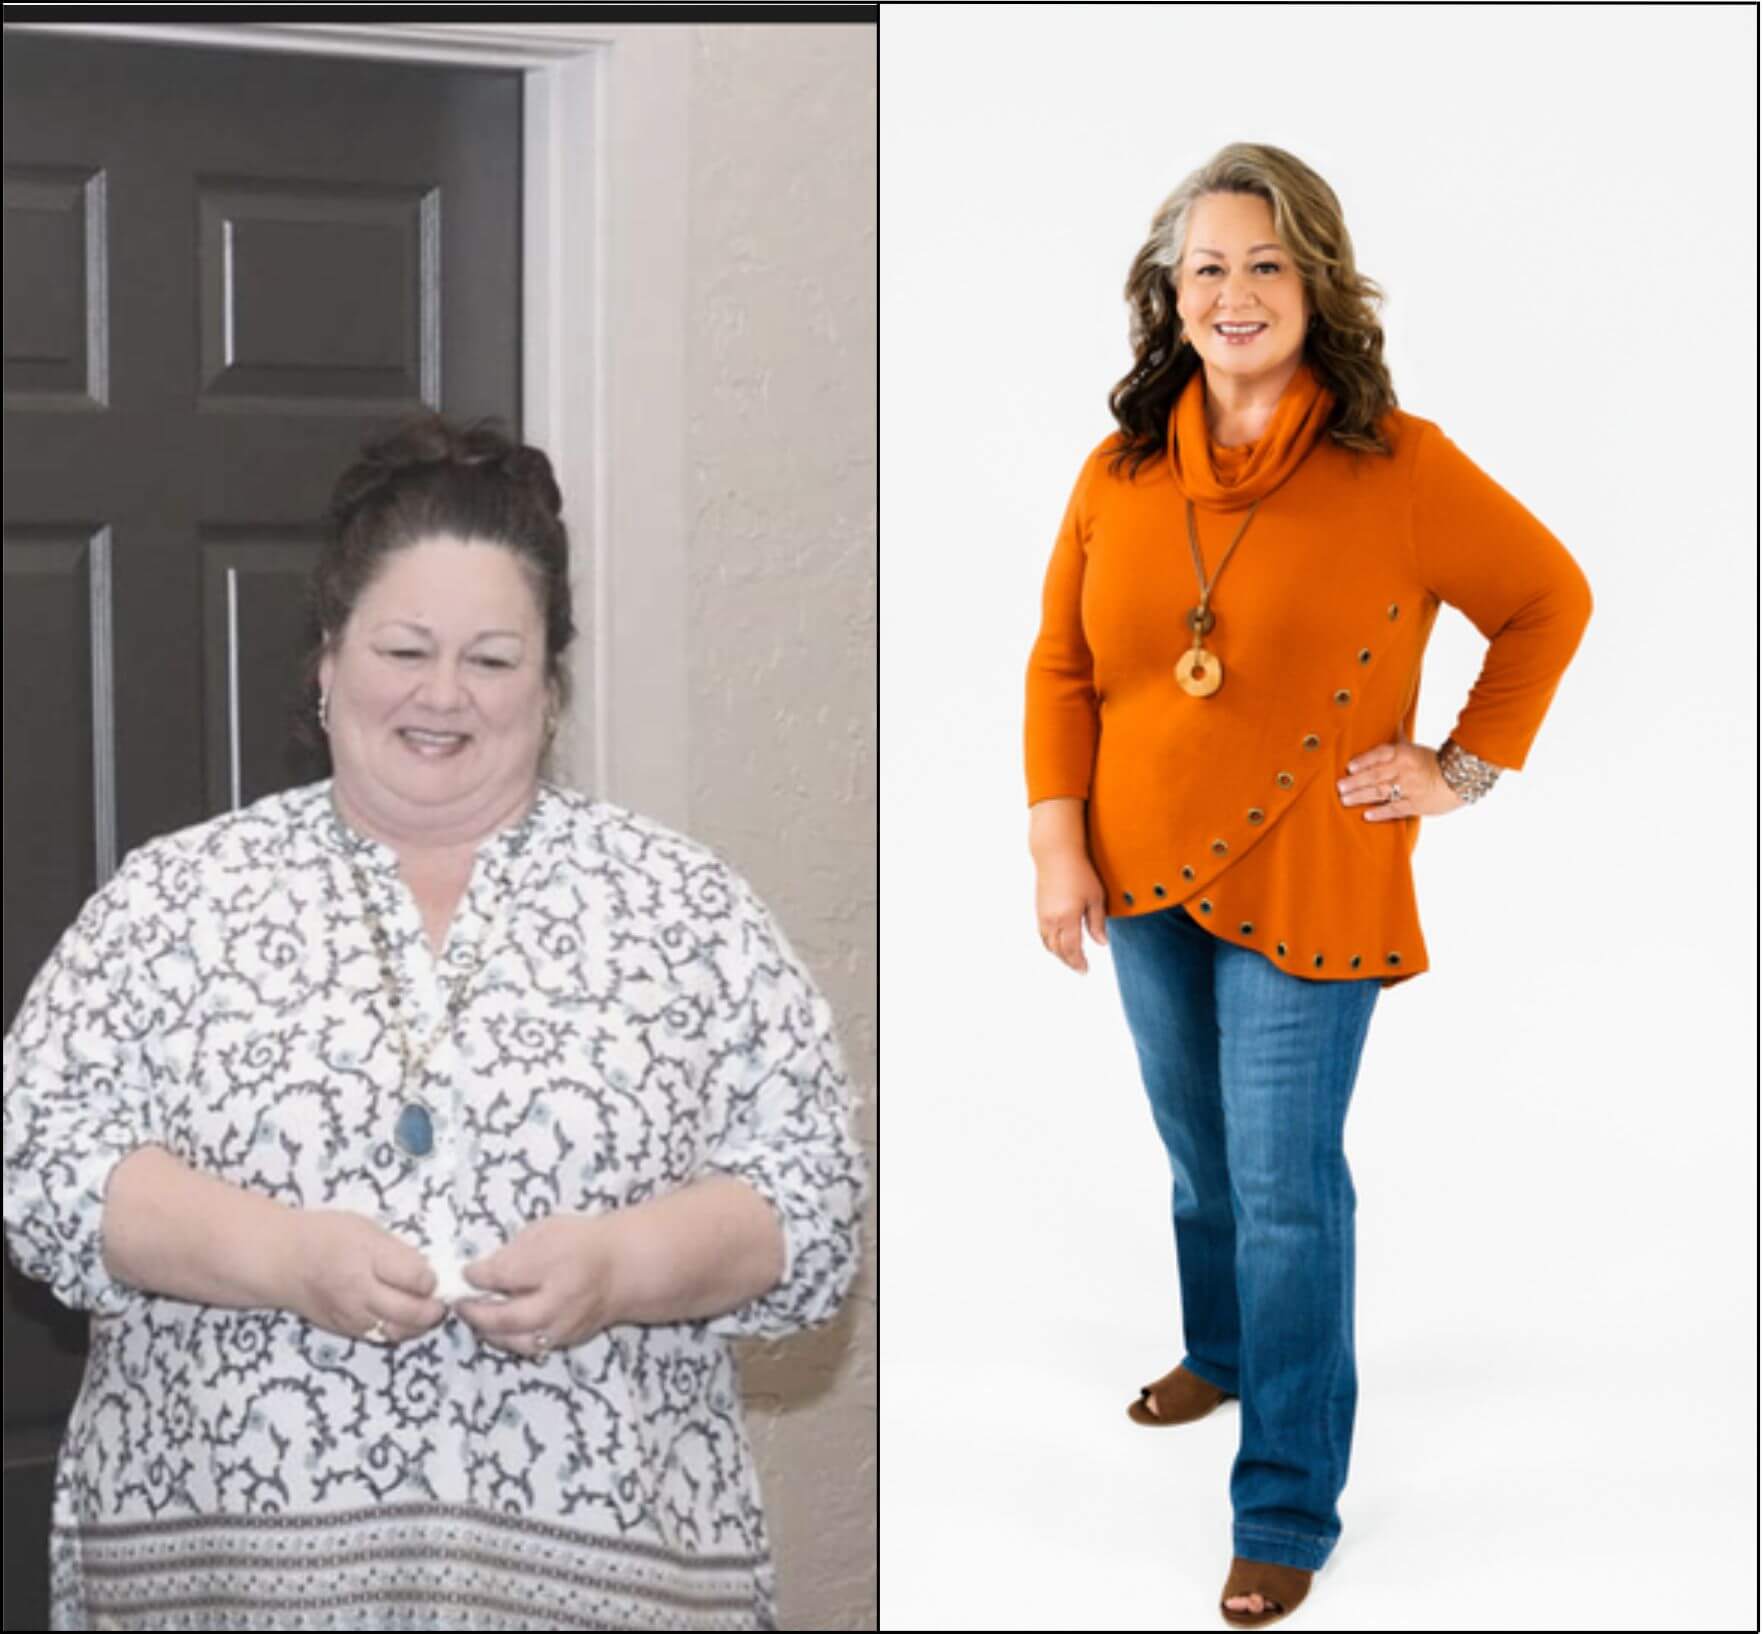 Two pictures of a woman before and after weight loss.